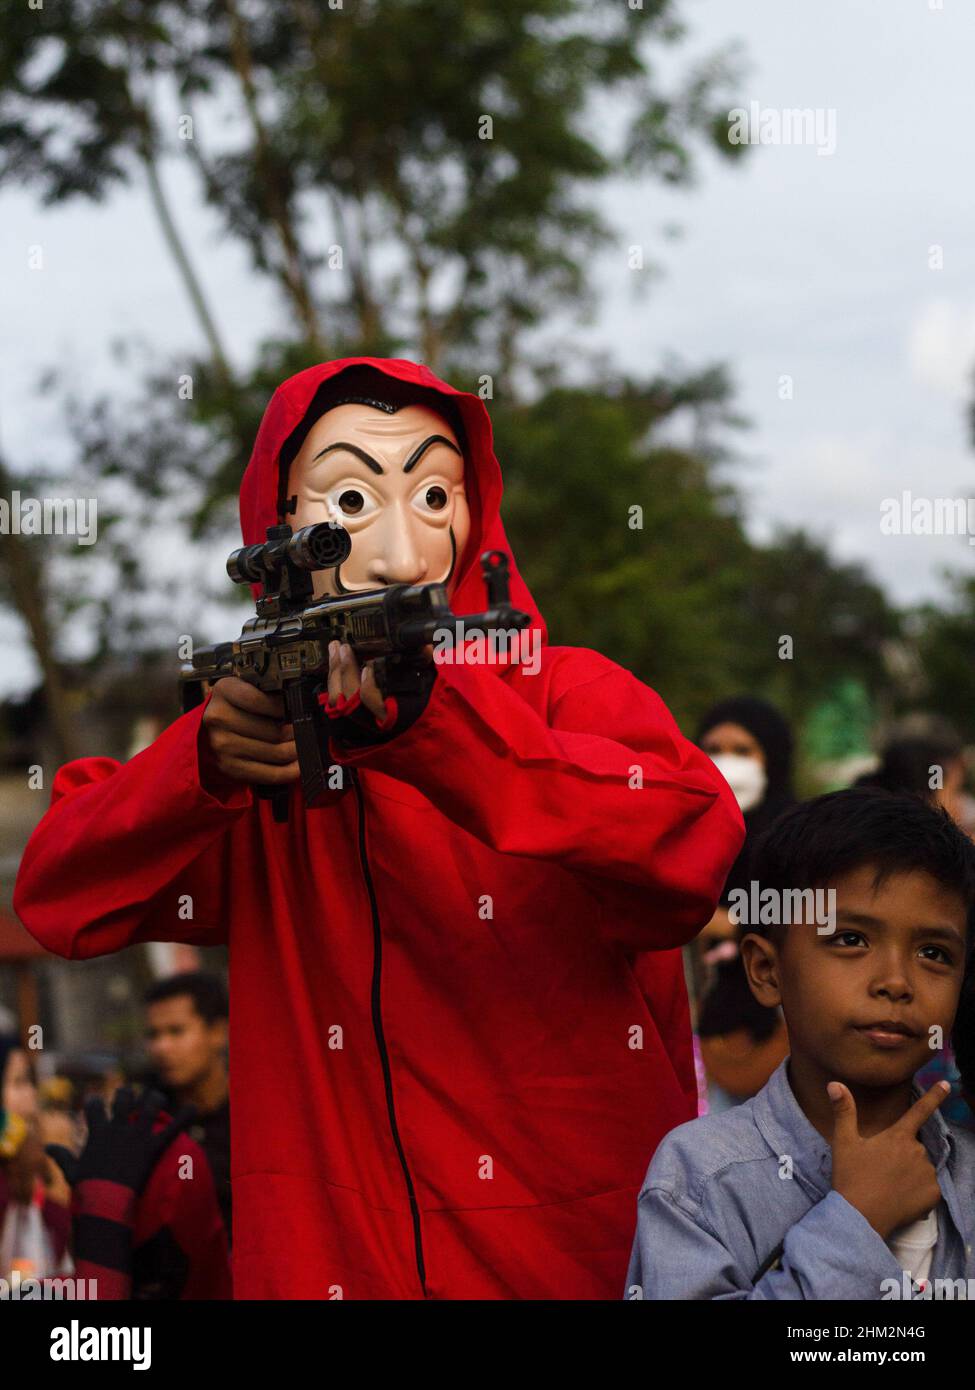 The people of Palembang city wear Red Jumpsuits and wear the Salvador Dali masks from the Money Heist Serial character to entertain visitors at one of the tourist attractions in the city of Palembang, South Sumatra. Behind the costumes and colors have meaning, the red jumpsuit was also chosen because red is a symbol for revolution and has been used by many resistance groups throughout history. Meanwhile, the meaning of the masks is in addition to maintaining their original identity. Salvador Dali masks are for purposes such as democracy, feminism and the environment. (Photo by Muhammad Shahab/ Stock Photo